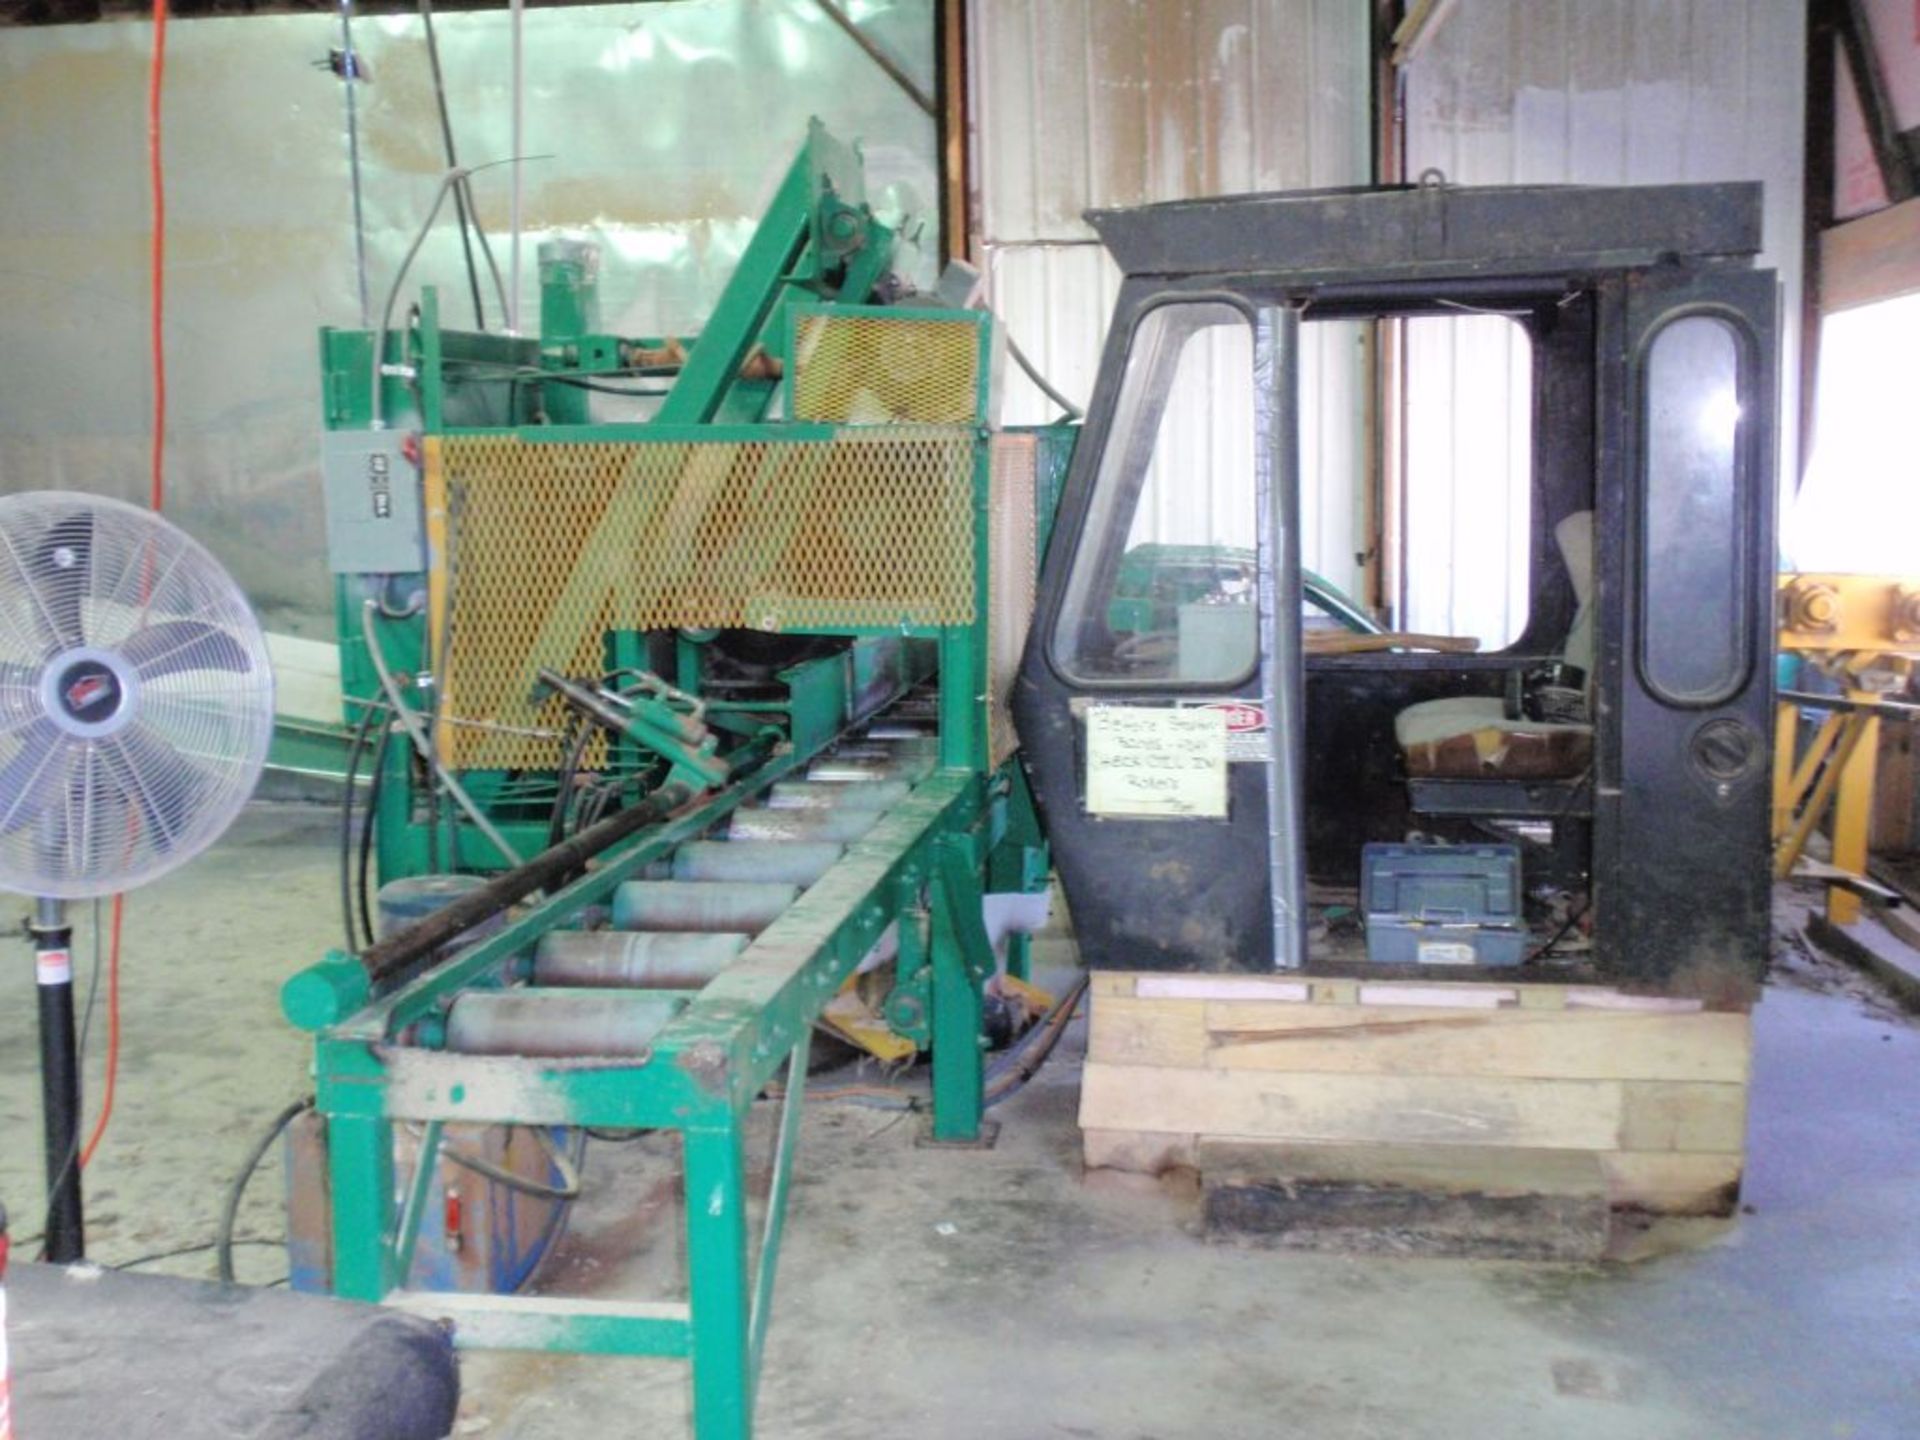 Pendew 2400 chopsaw w/infeed and outfeed.